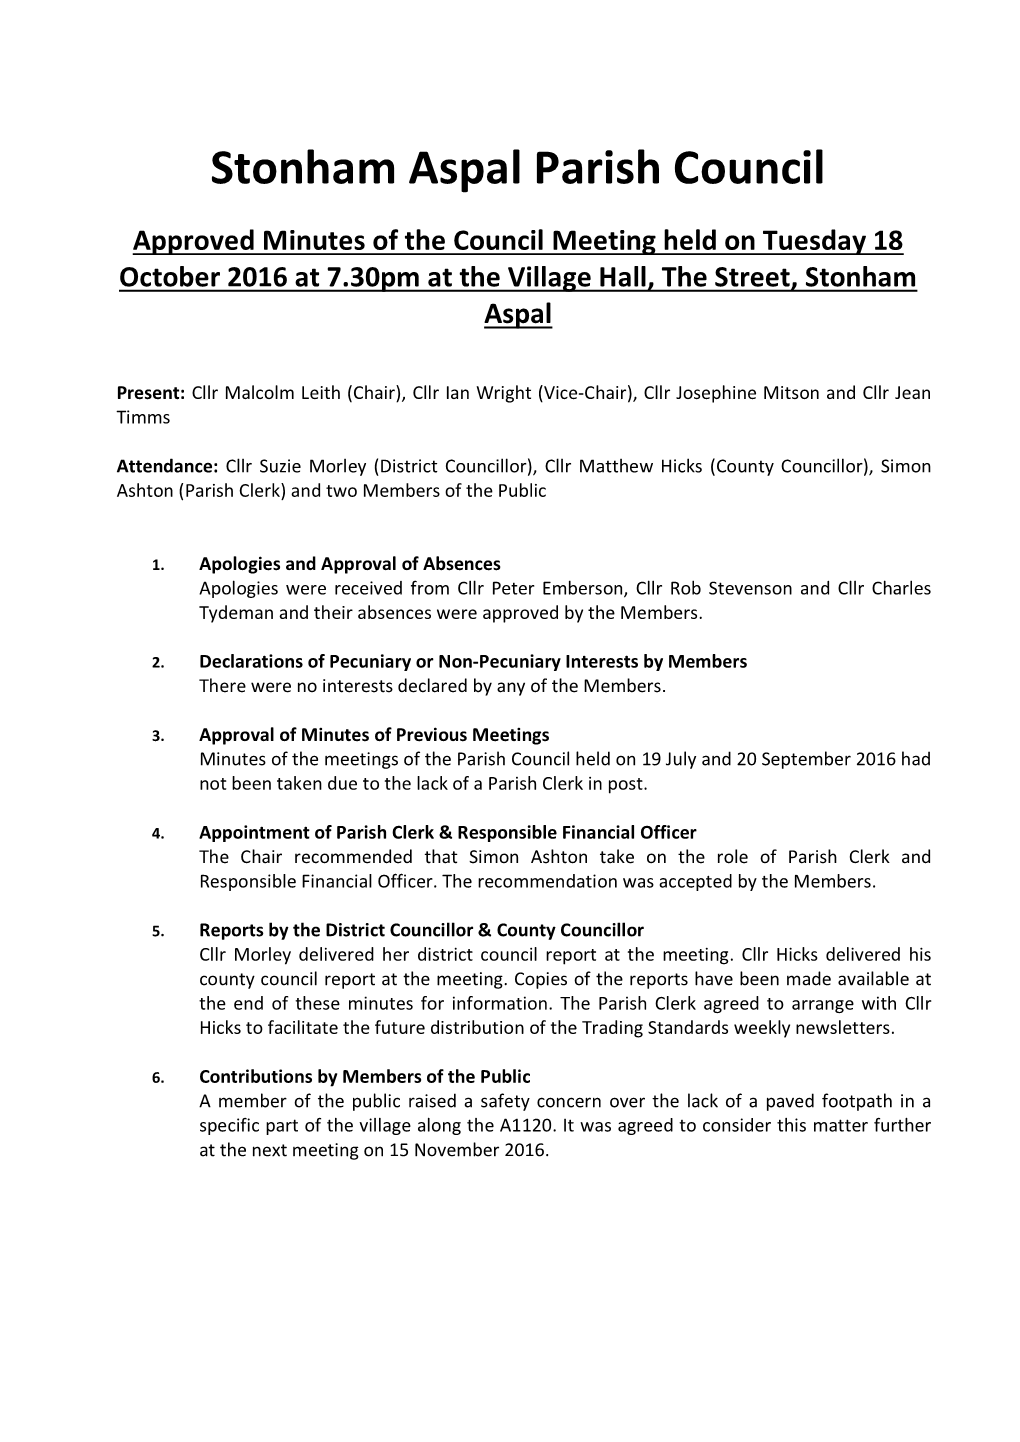 Parish Council Meeting on 18 October 2016 Approved Minutes